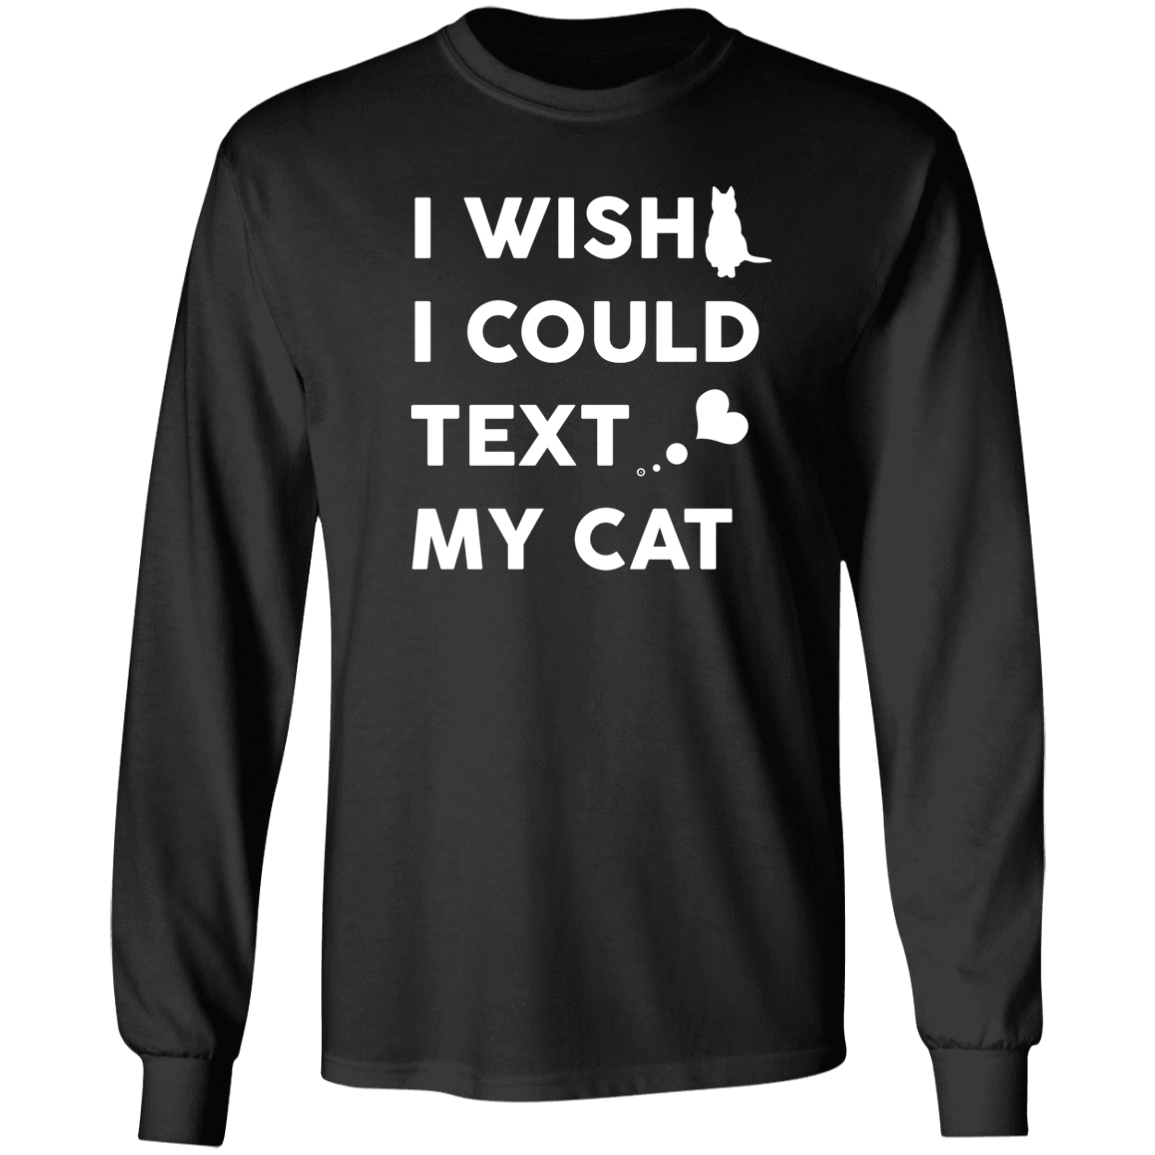 I Wish I Could Text My Cat - Long Sleeve T Shirt.